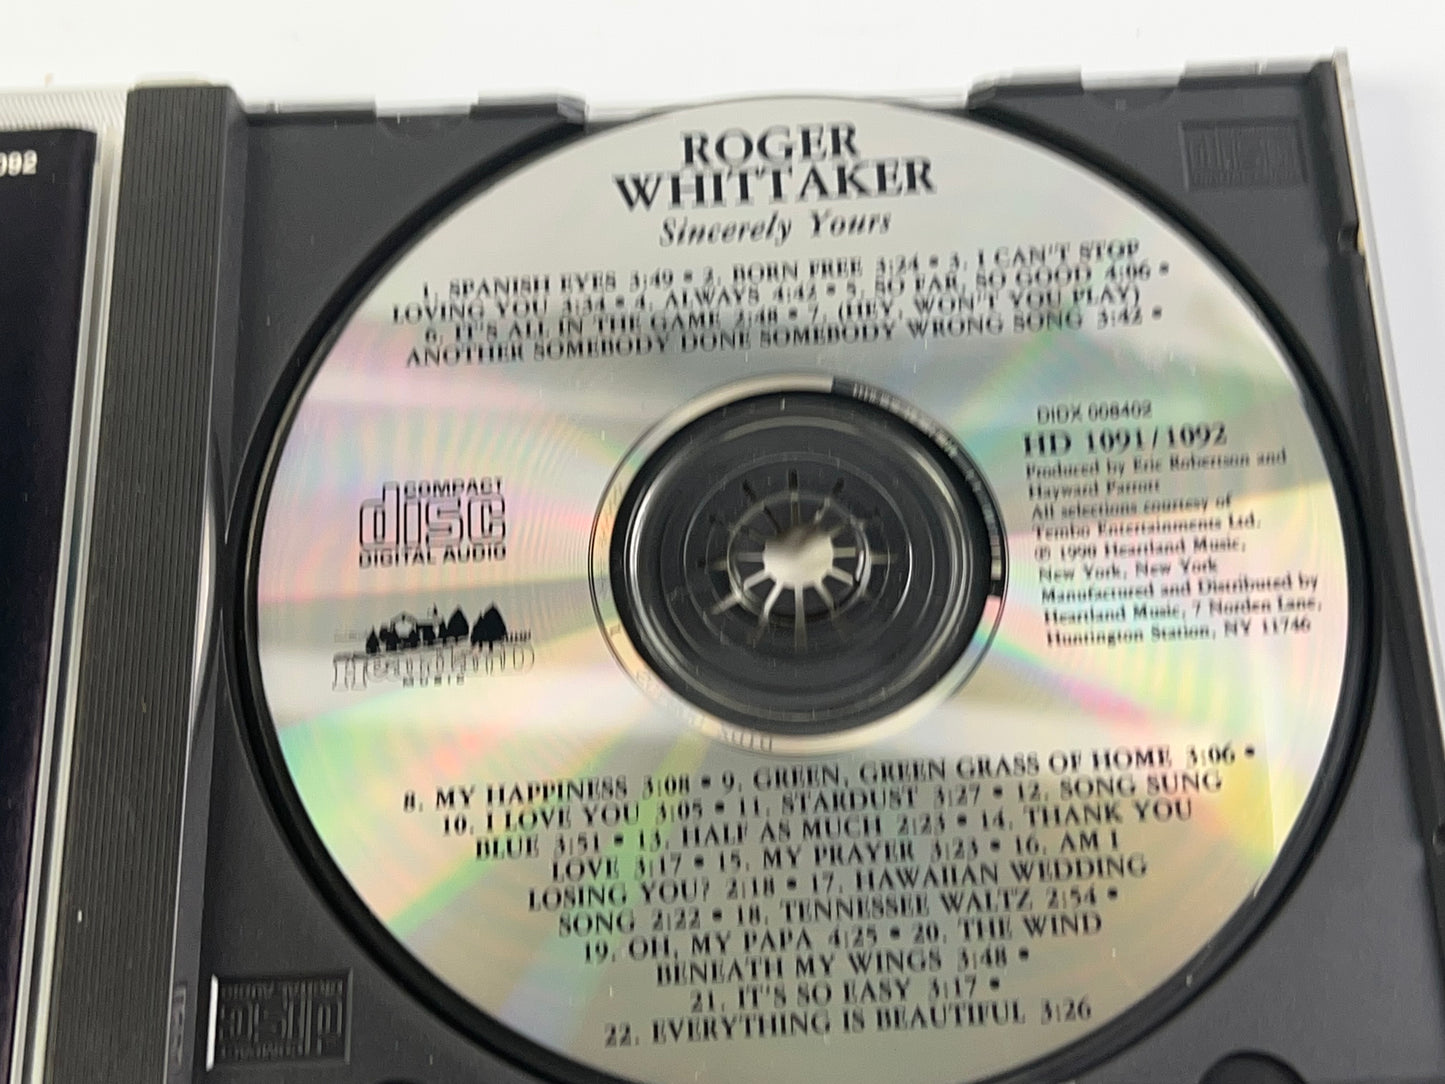 Sincerely Yours by Roger Whittaker - Music CD - Roger Whittaker